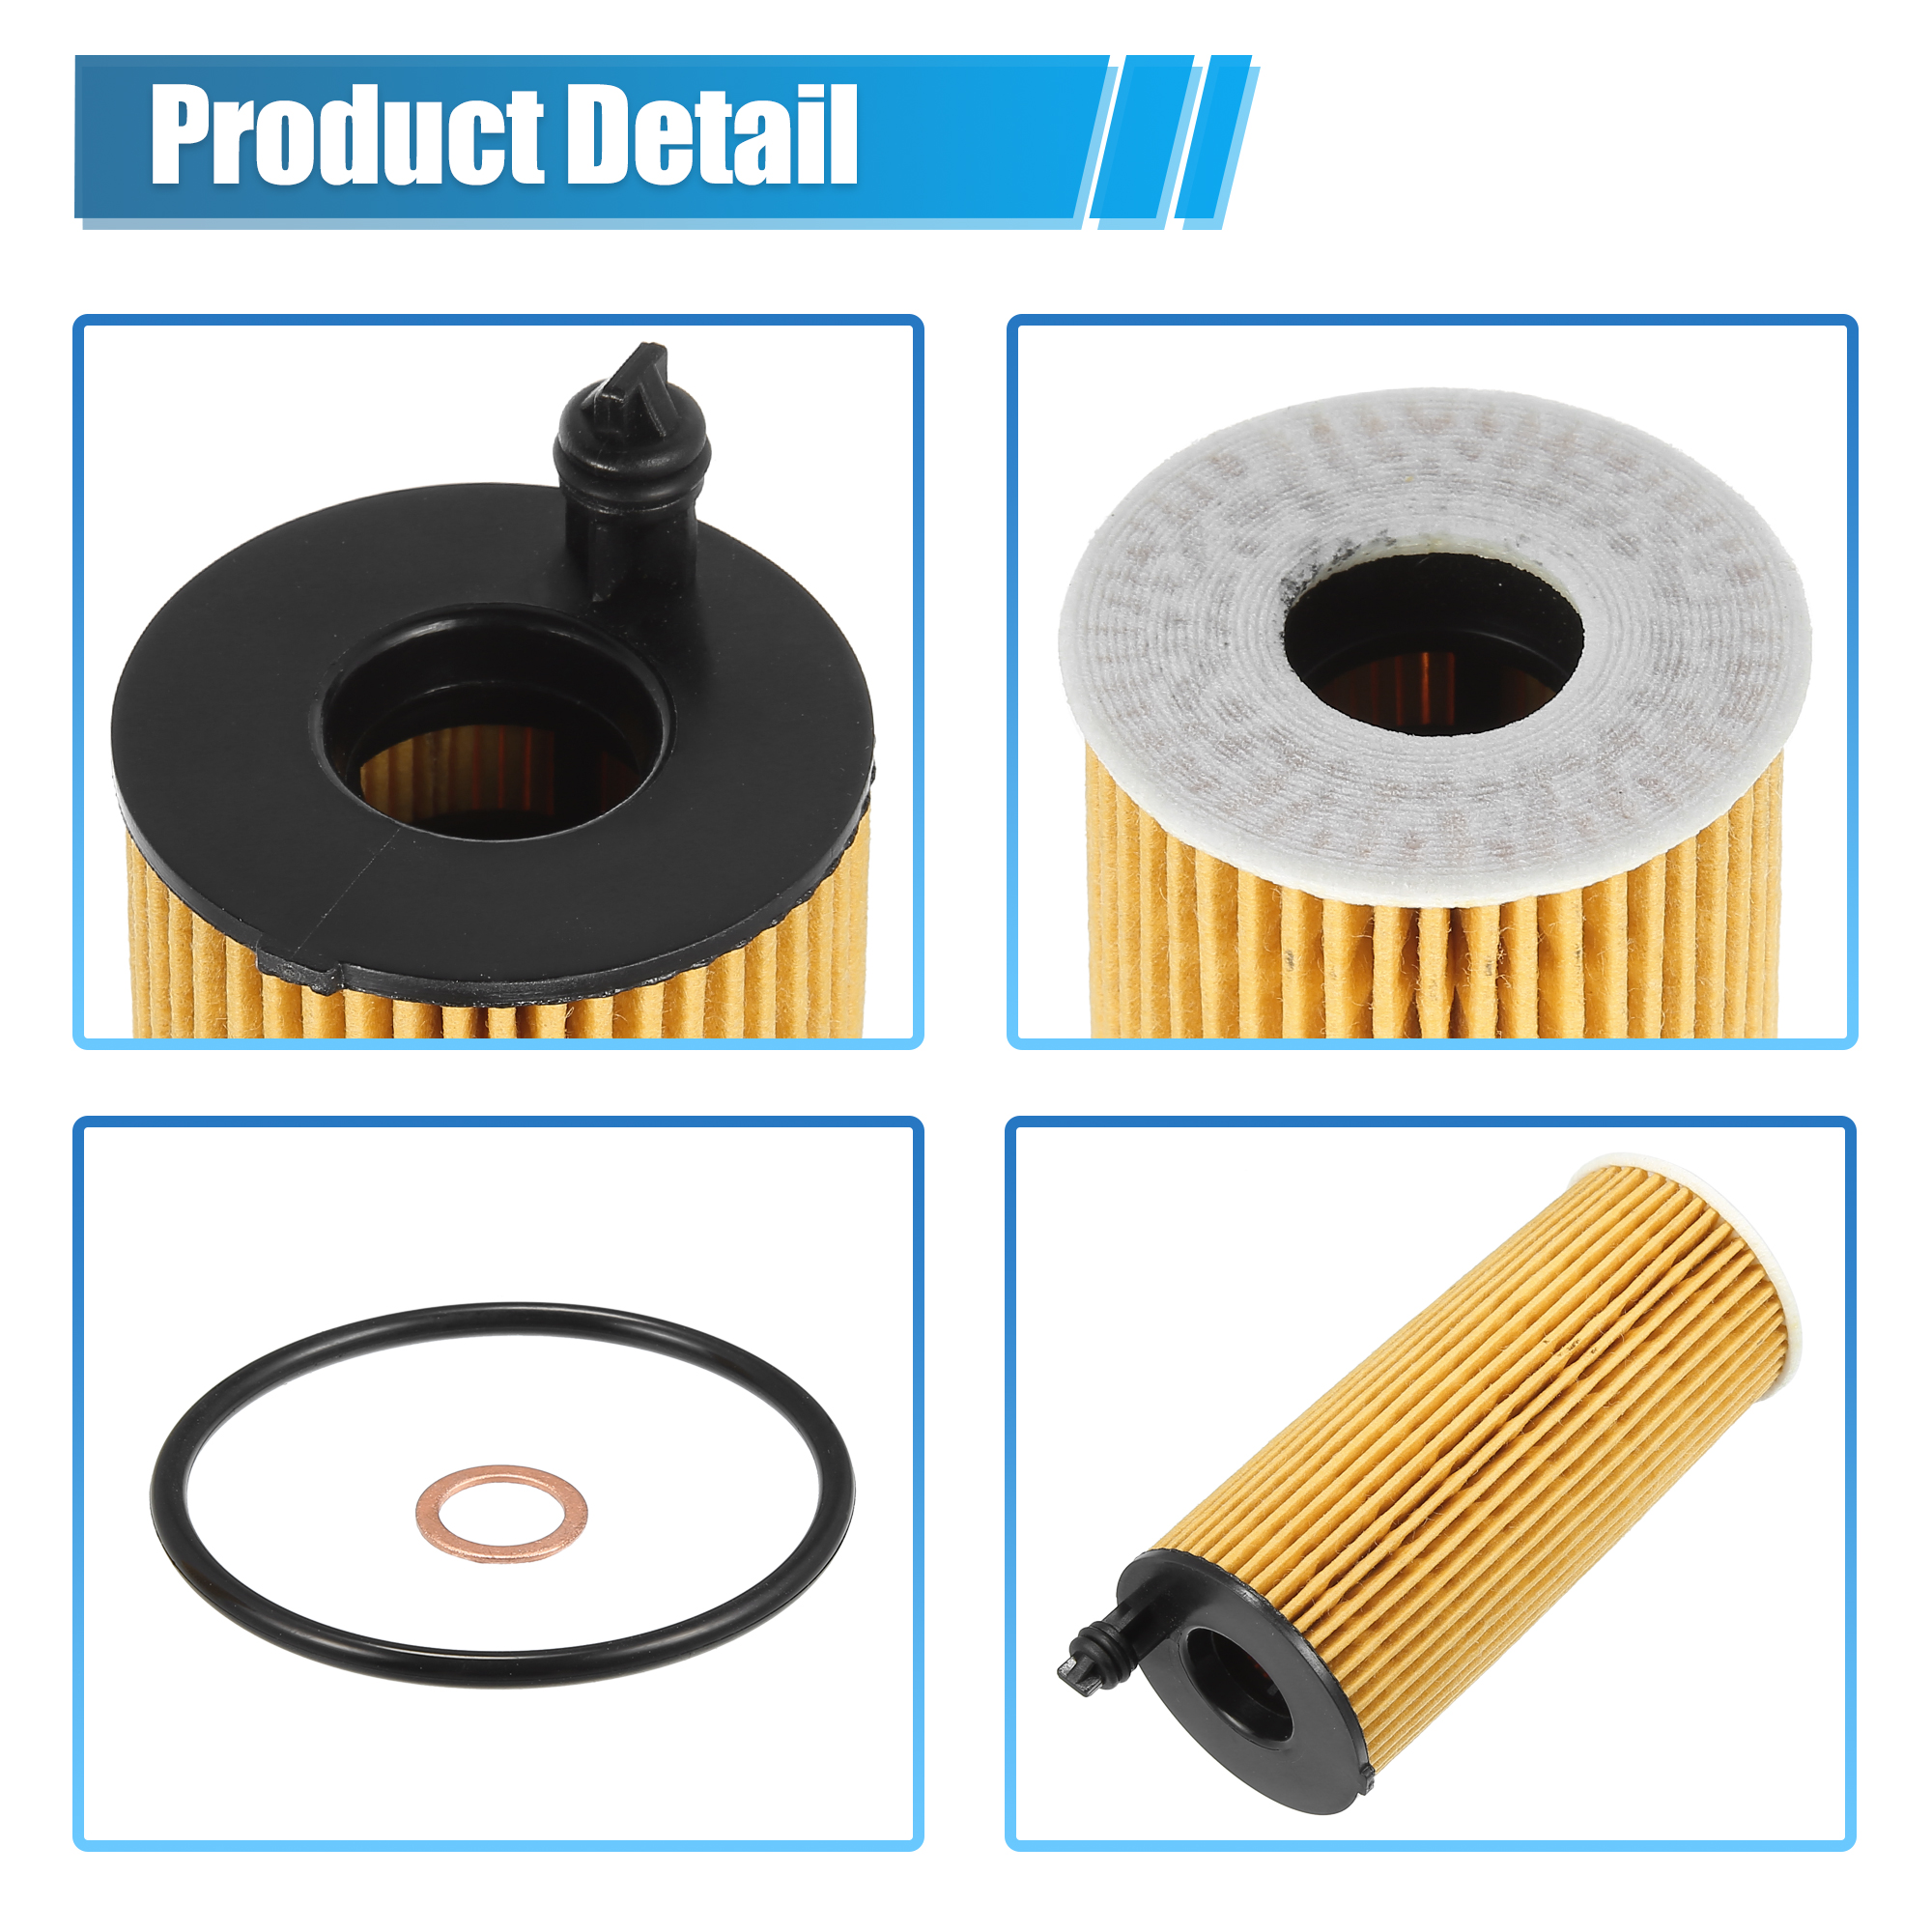 Unique Bargains Engine Oil Filter Replacement 11-42-8-575-211 Oil Fuel Filter for BMW X3